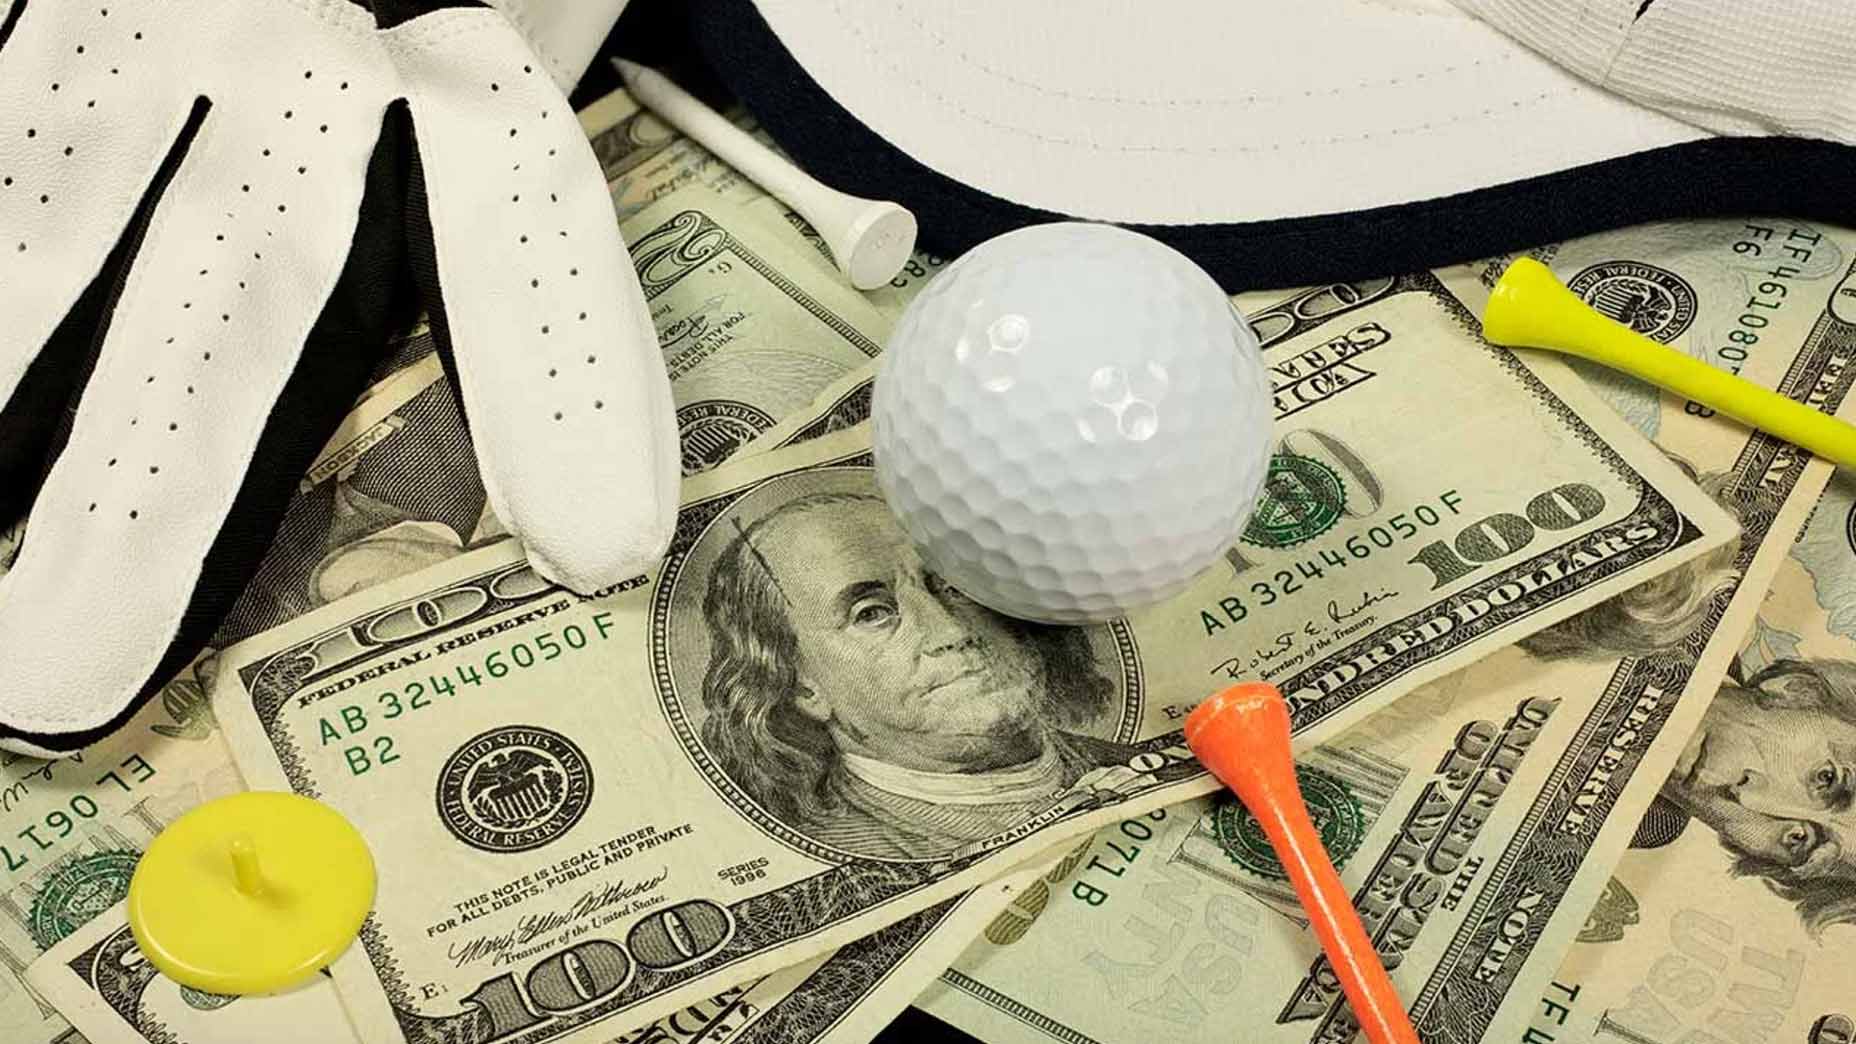 A golf ball, golf glove, and golf tee sit on a pile of US dollars